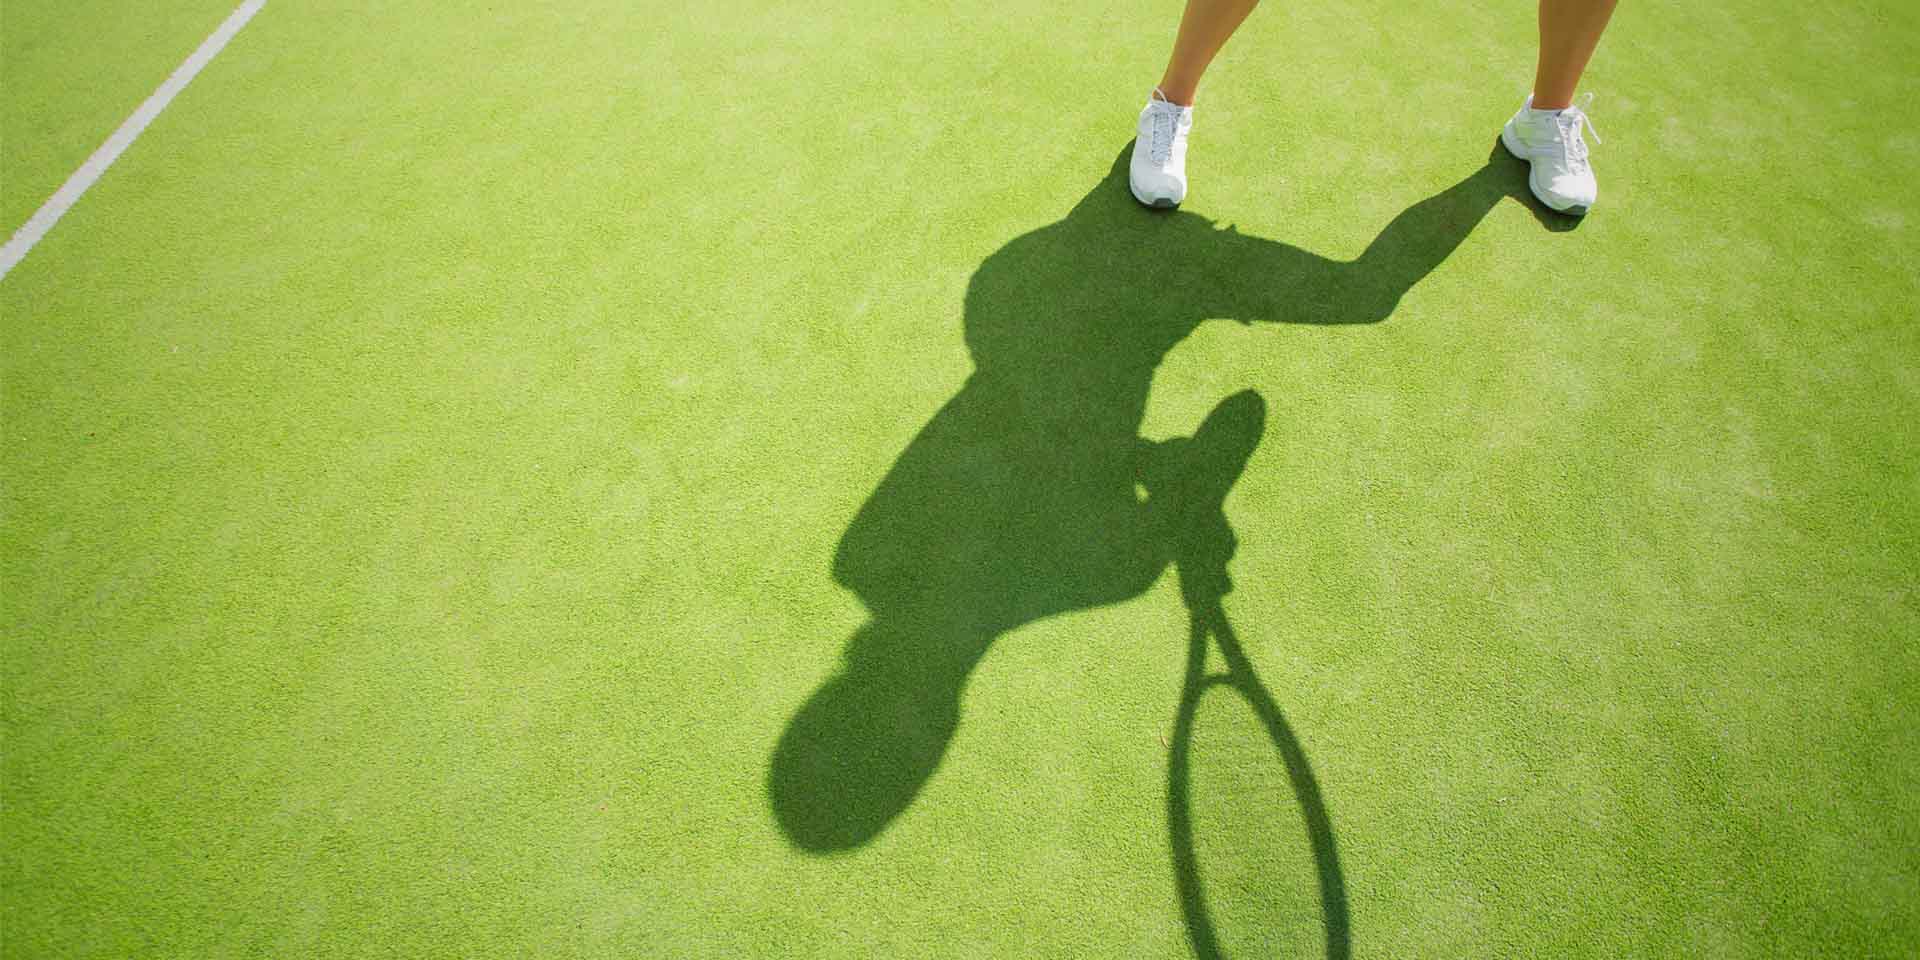 Tennis player's shadow.